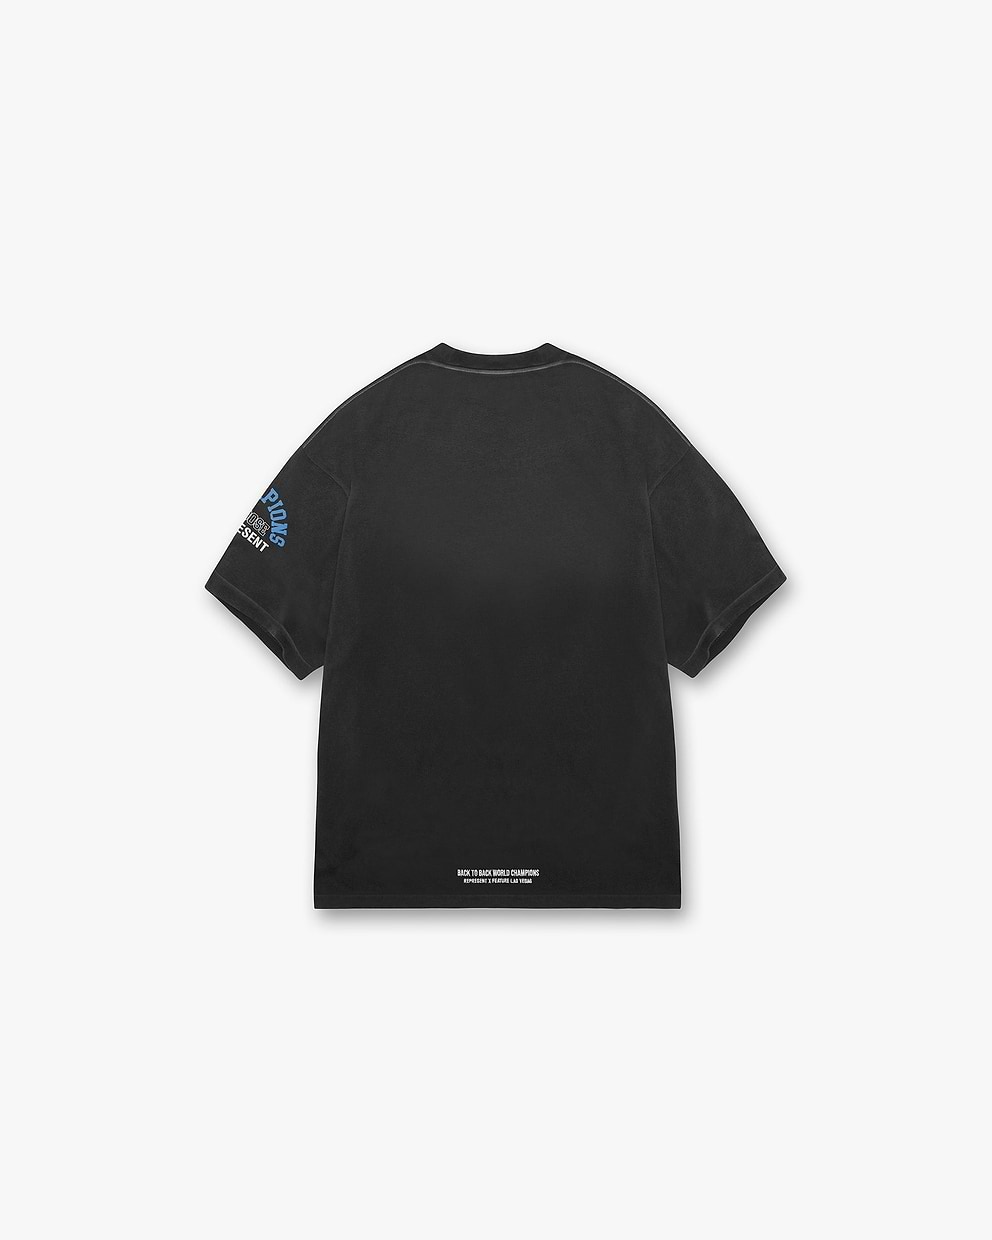 Represent X Feature Champion Rings T-Shirt - Stained Black